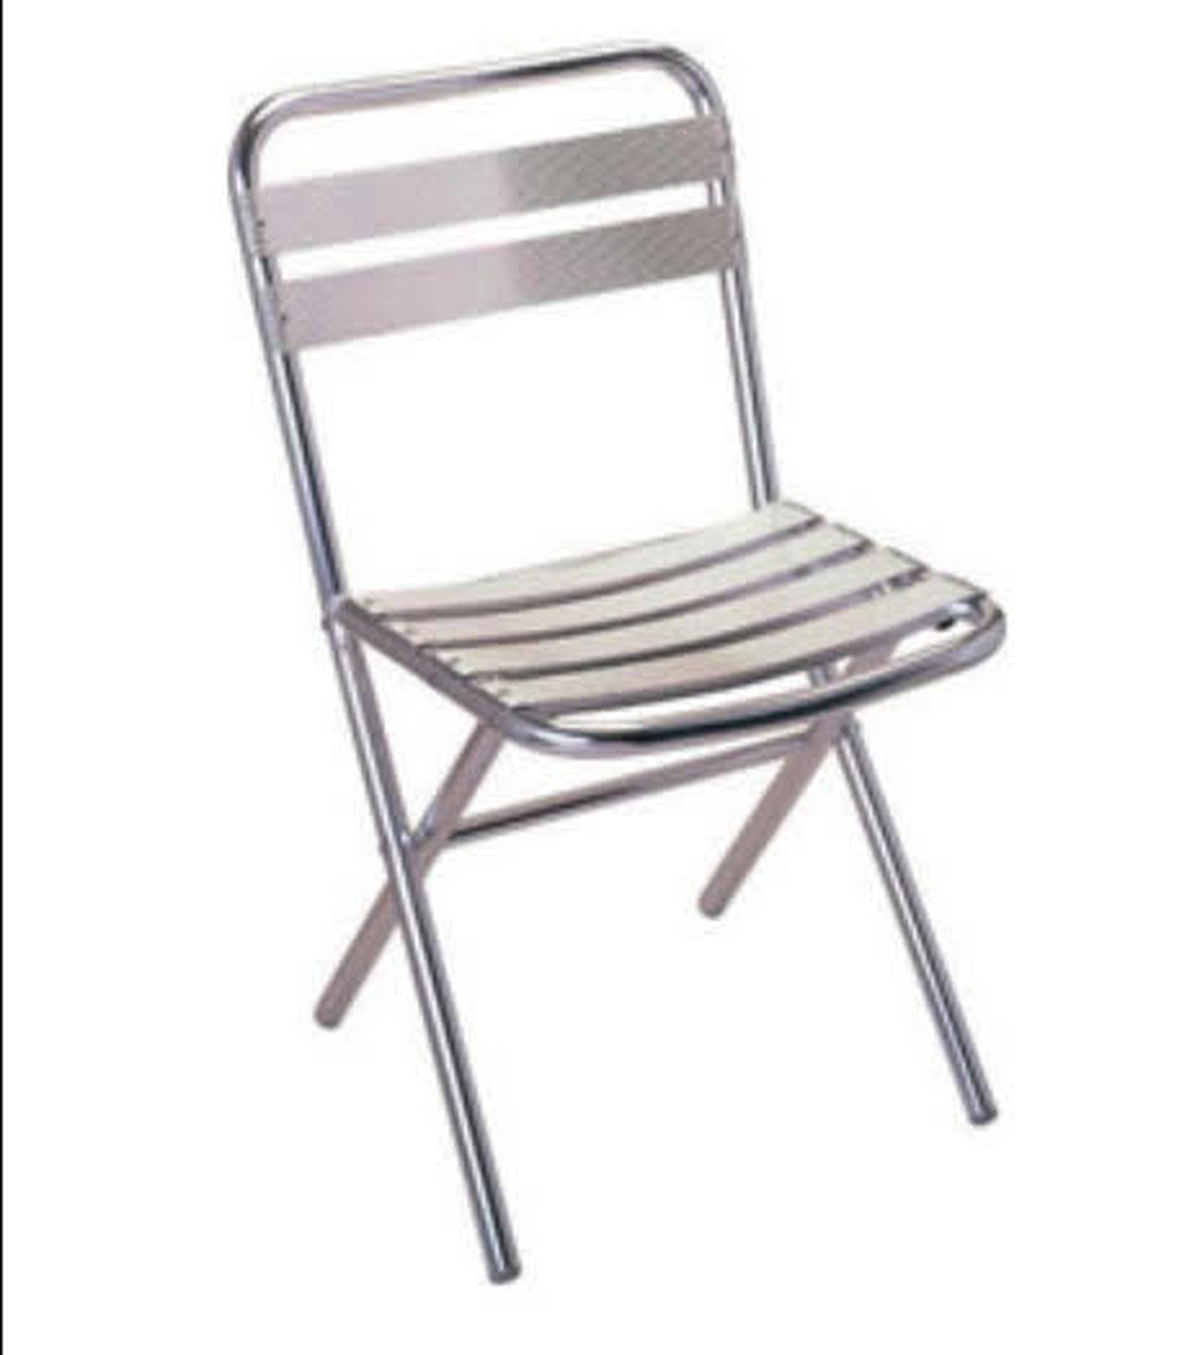 Secondhand Folding Chairs 656 